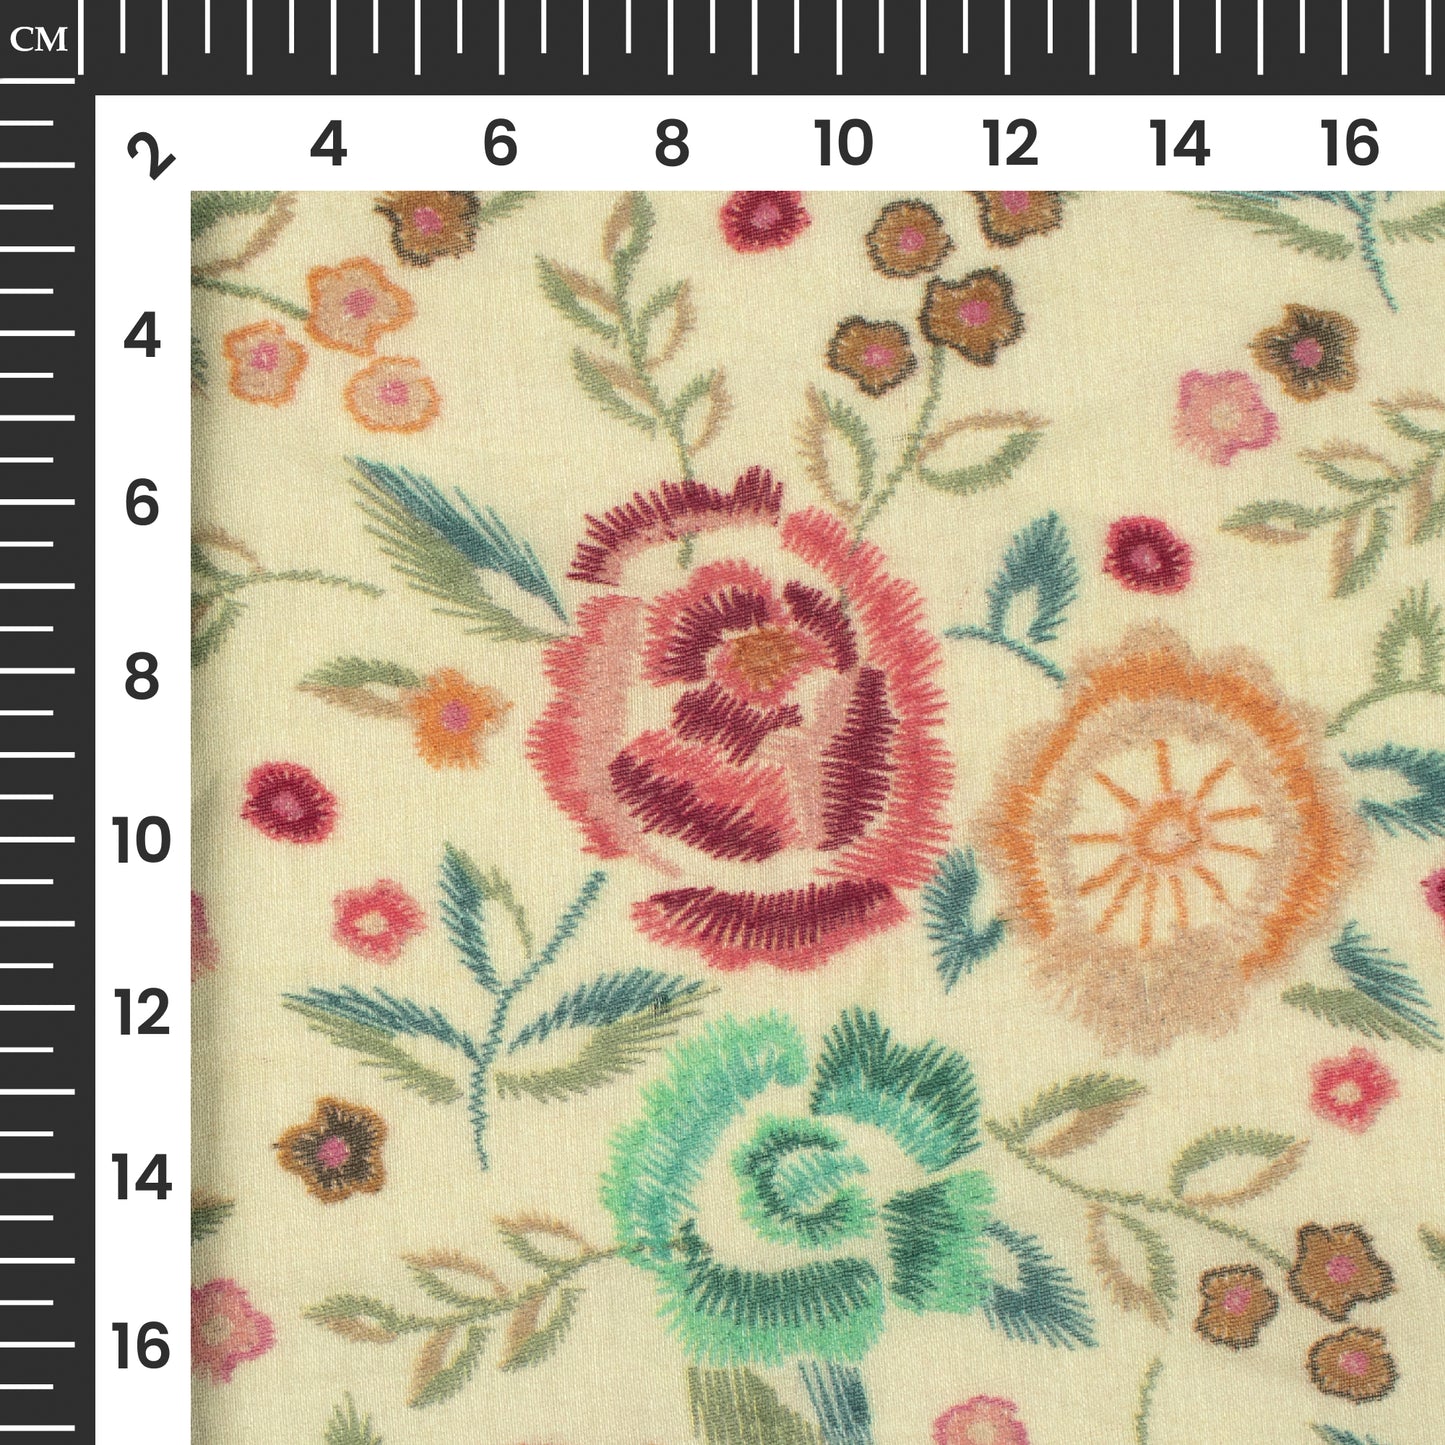 Salmon Pink And Cream Floral Digital Print Pure Cotton Mulmul Fabric